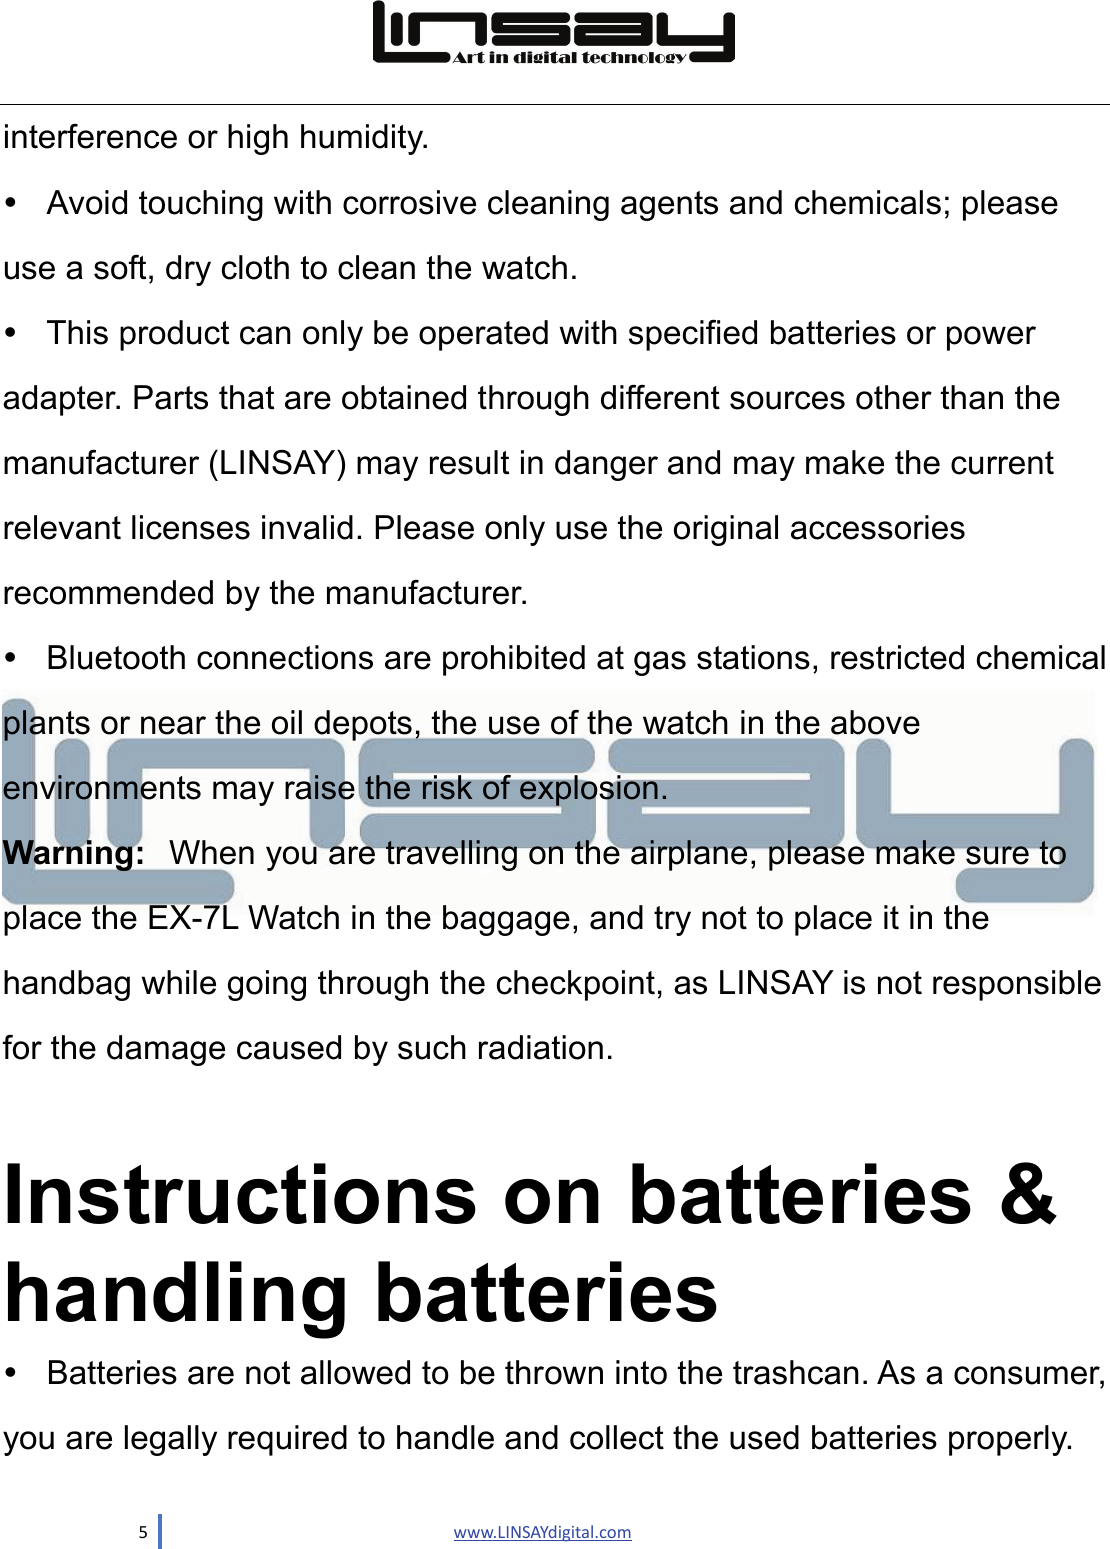  5                               www.LINSAYdigital.com  interference or high humidity.     Avoid touching with corrosive cleaning agents and chemicals; please use a soft, dry cloth to clean the watch.   This product can only be operated with specified batteries or power adapter. Parts that are obtained through different sources other than the manufacturer (LINSAY) may result in danger and may make the current   relevant licenses invalid. Please only use the original accessories recommended by the manufacturer.     Bluetooth connections are prohibited at gas stations, restricted chemical plants or near the oil depots, the use of the watch in the above environments may raise the risk of explosion.   Warning: When you are travelling on the airplane, please make sure to place the EX-7L Watch in the baggage, and try not to place it in the handbag while going through the checkpoint, as LINSAY is not responsible for the damage caused by such radiation.  Instructions on batteries &amp; handling batteries   Batteries are not allowed to be thrown into the trashcan. As a consumer, you are legally required to handle and collect the used batteries properly.   